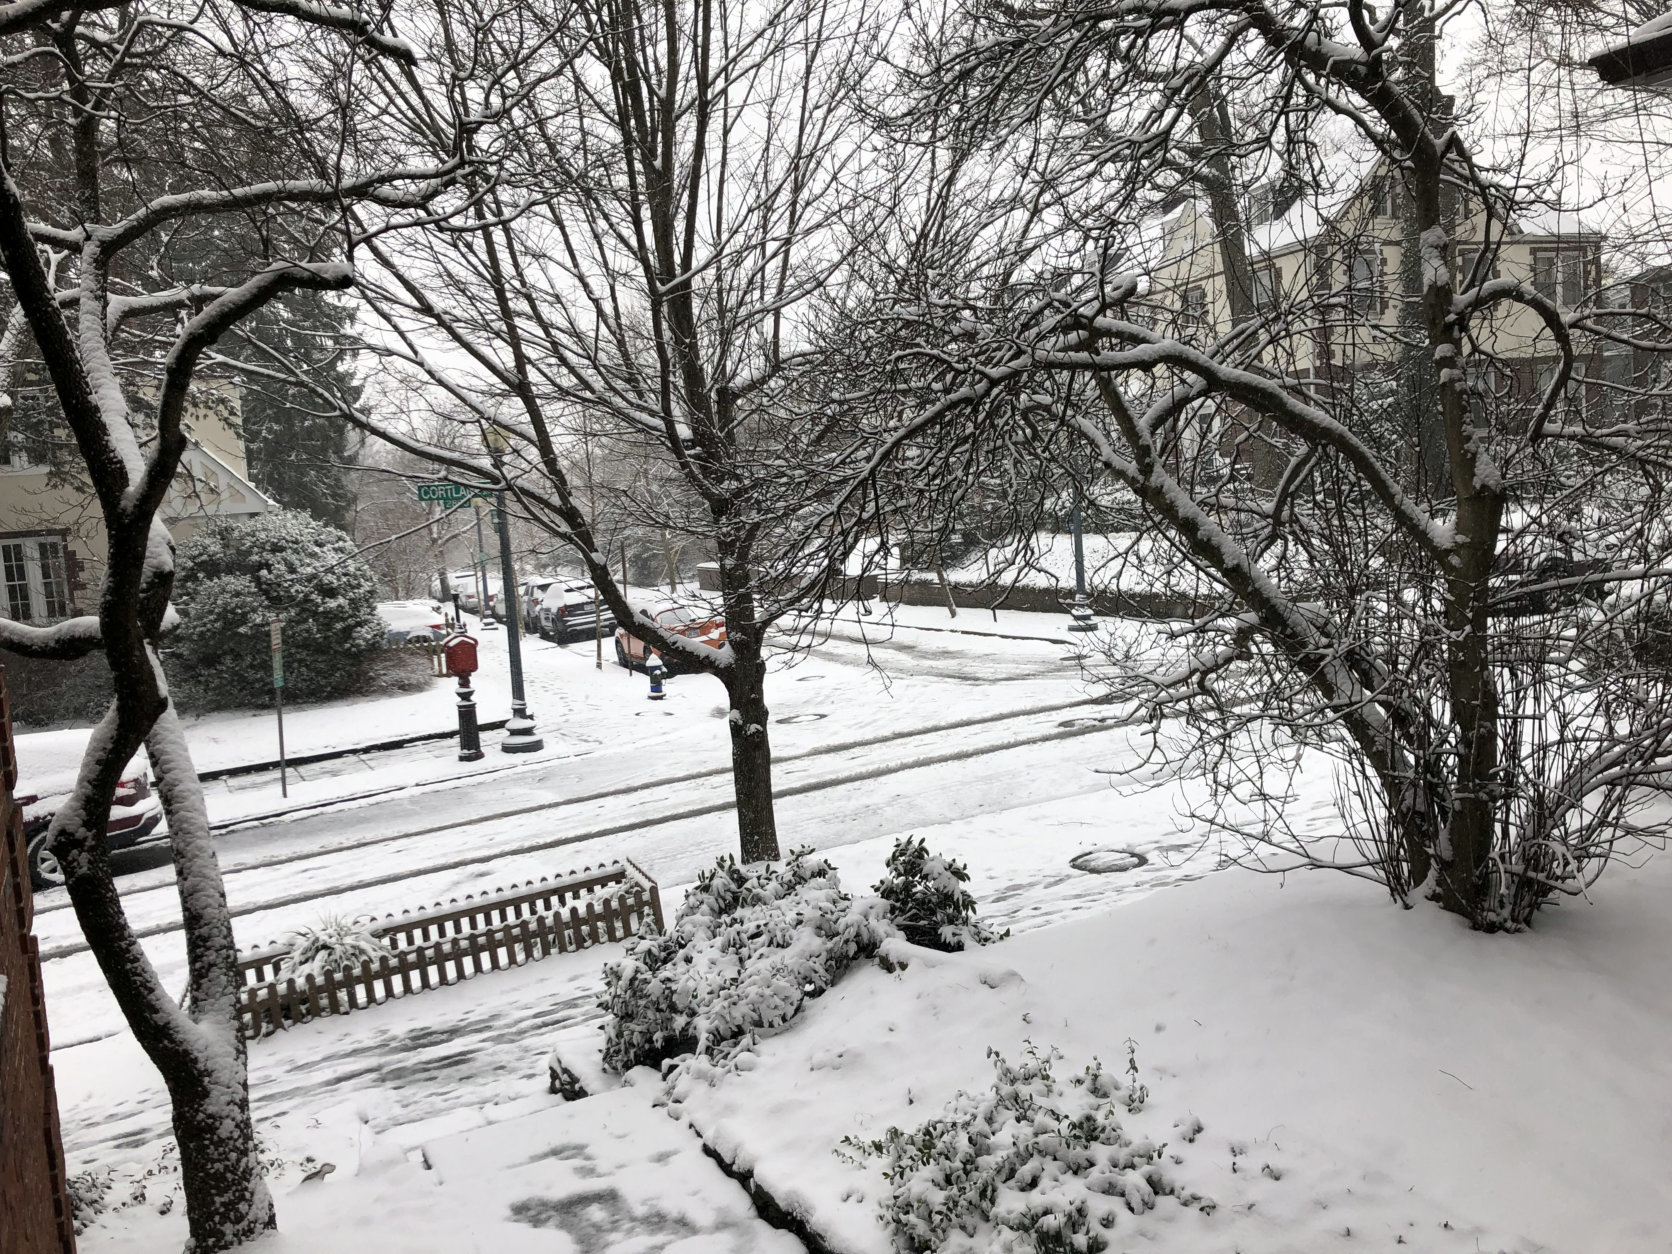 The District's Woodley Park got its fair share of snow Wednesday. (WTOP/Brennan Haselton)